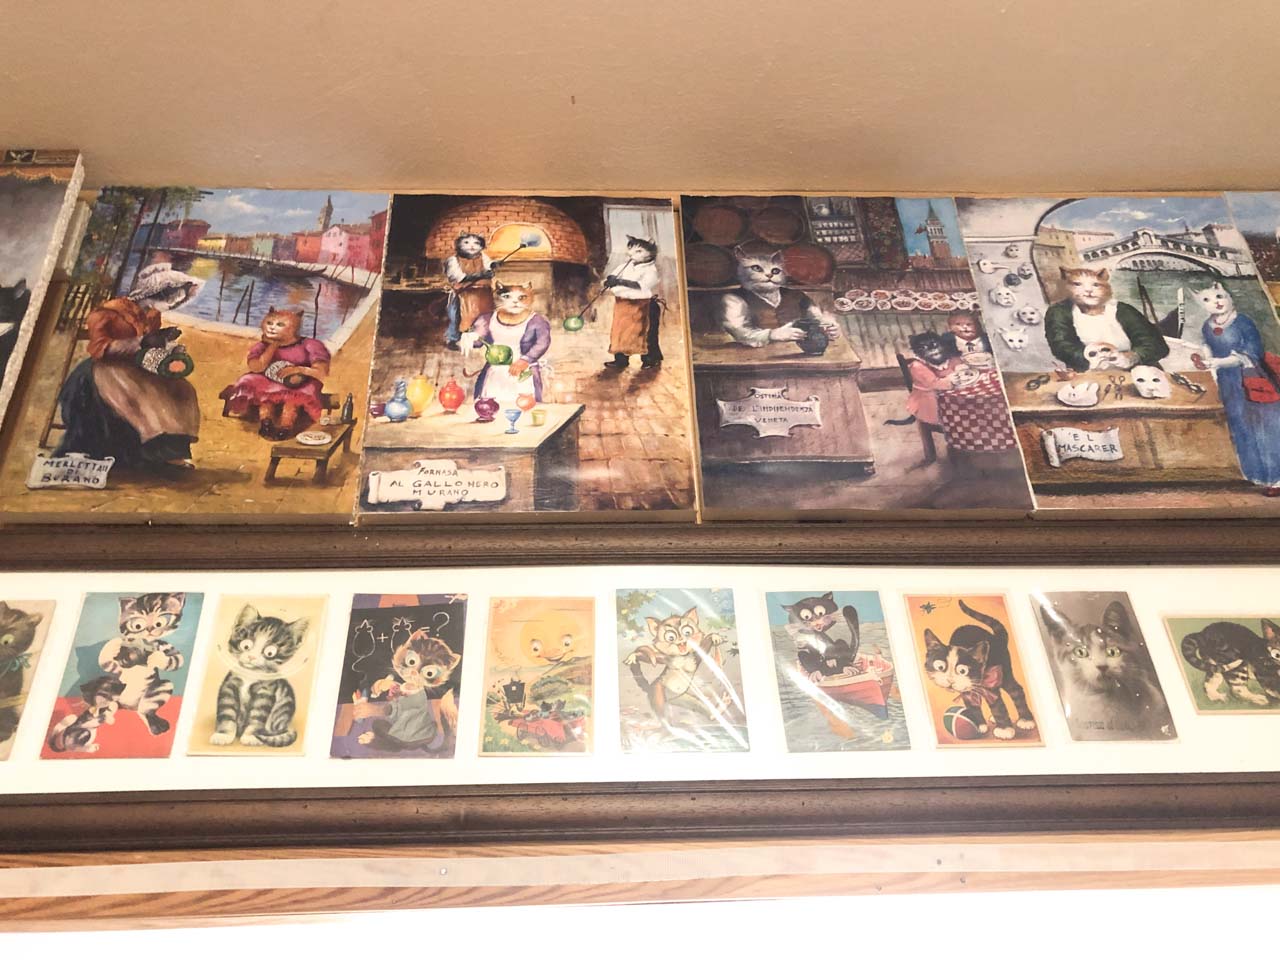 Vintage cat posters and illustrations on display at the Cat Museum in Kotor, Montenegro